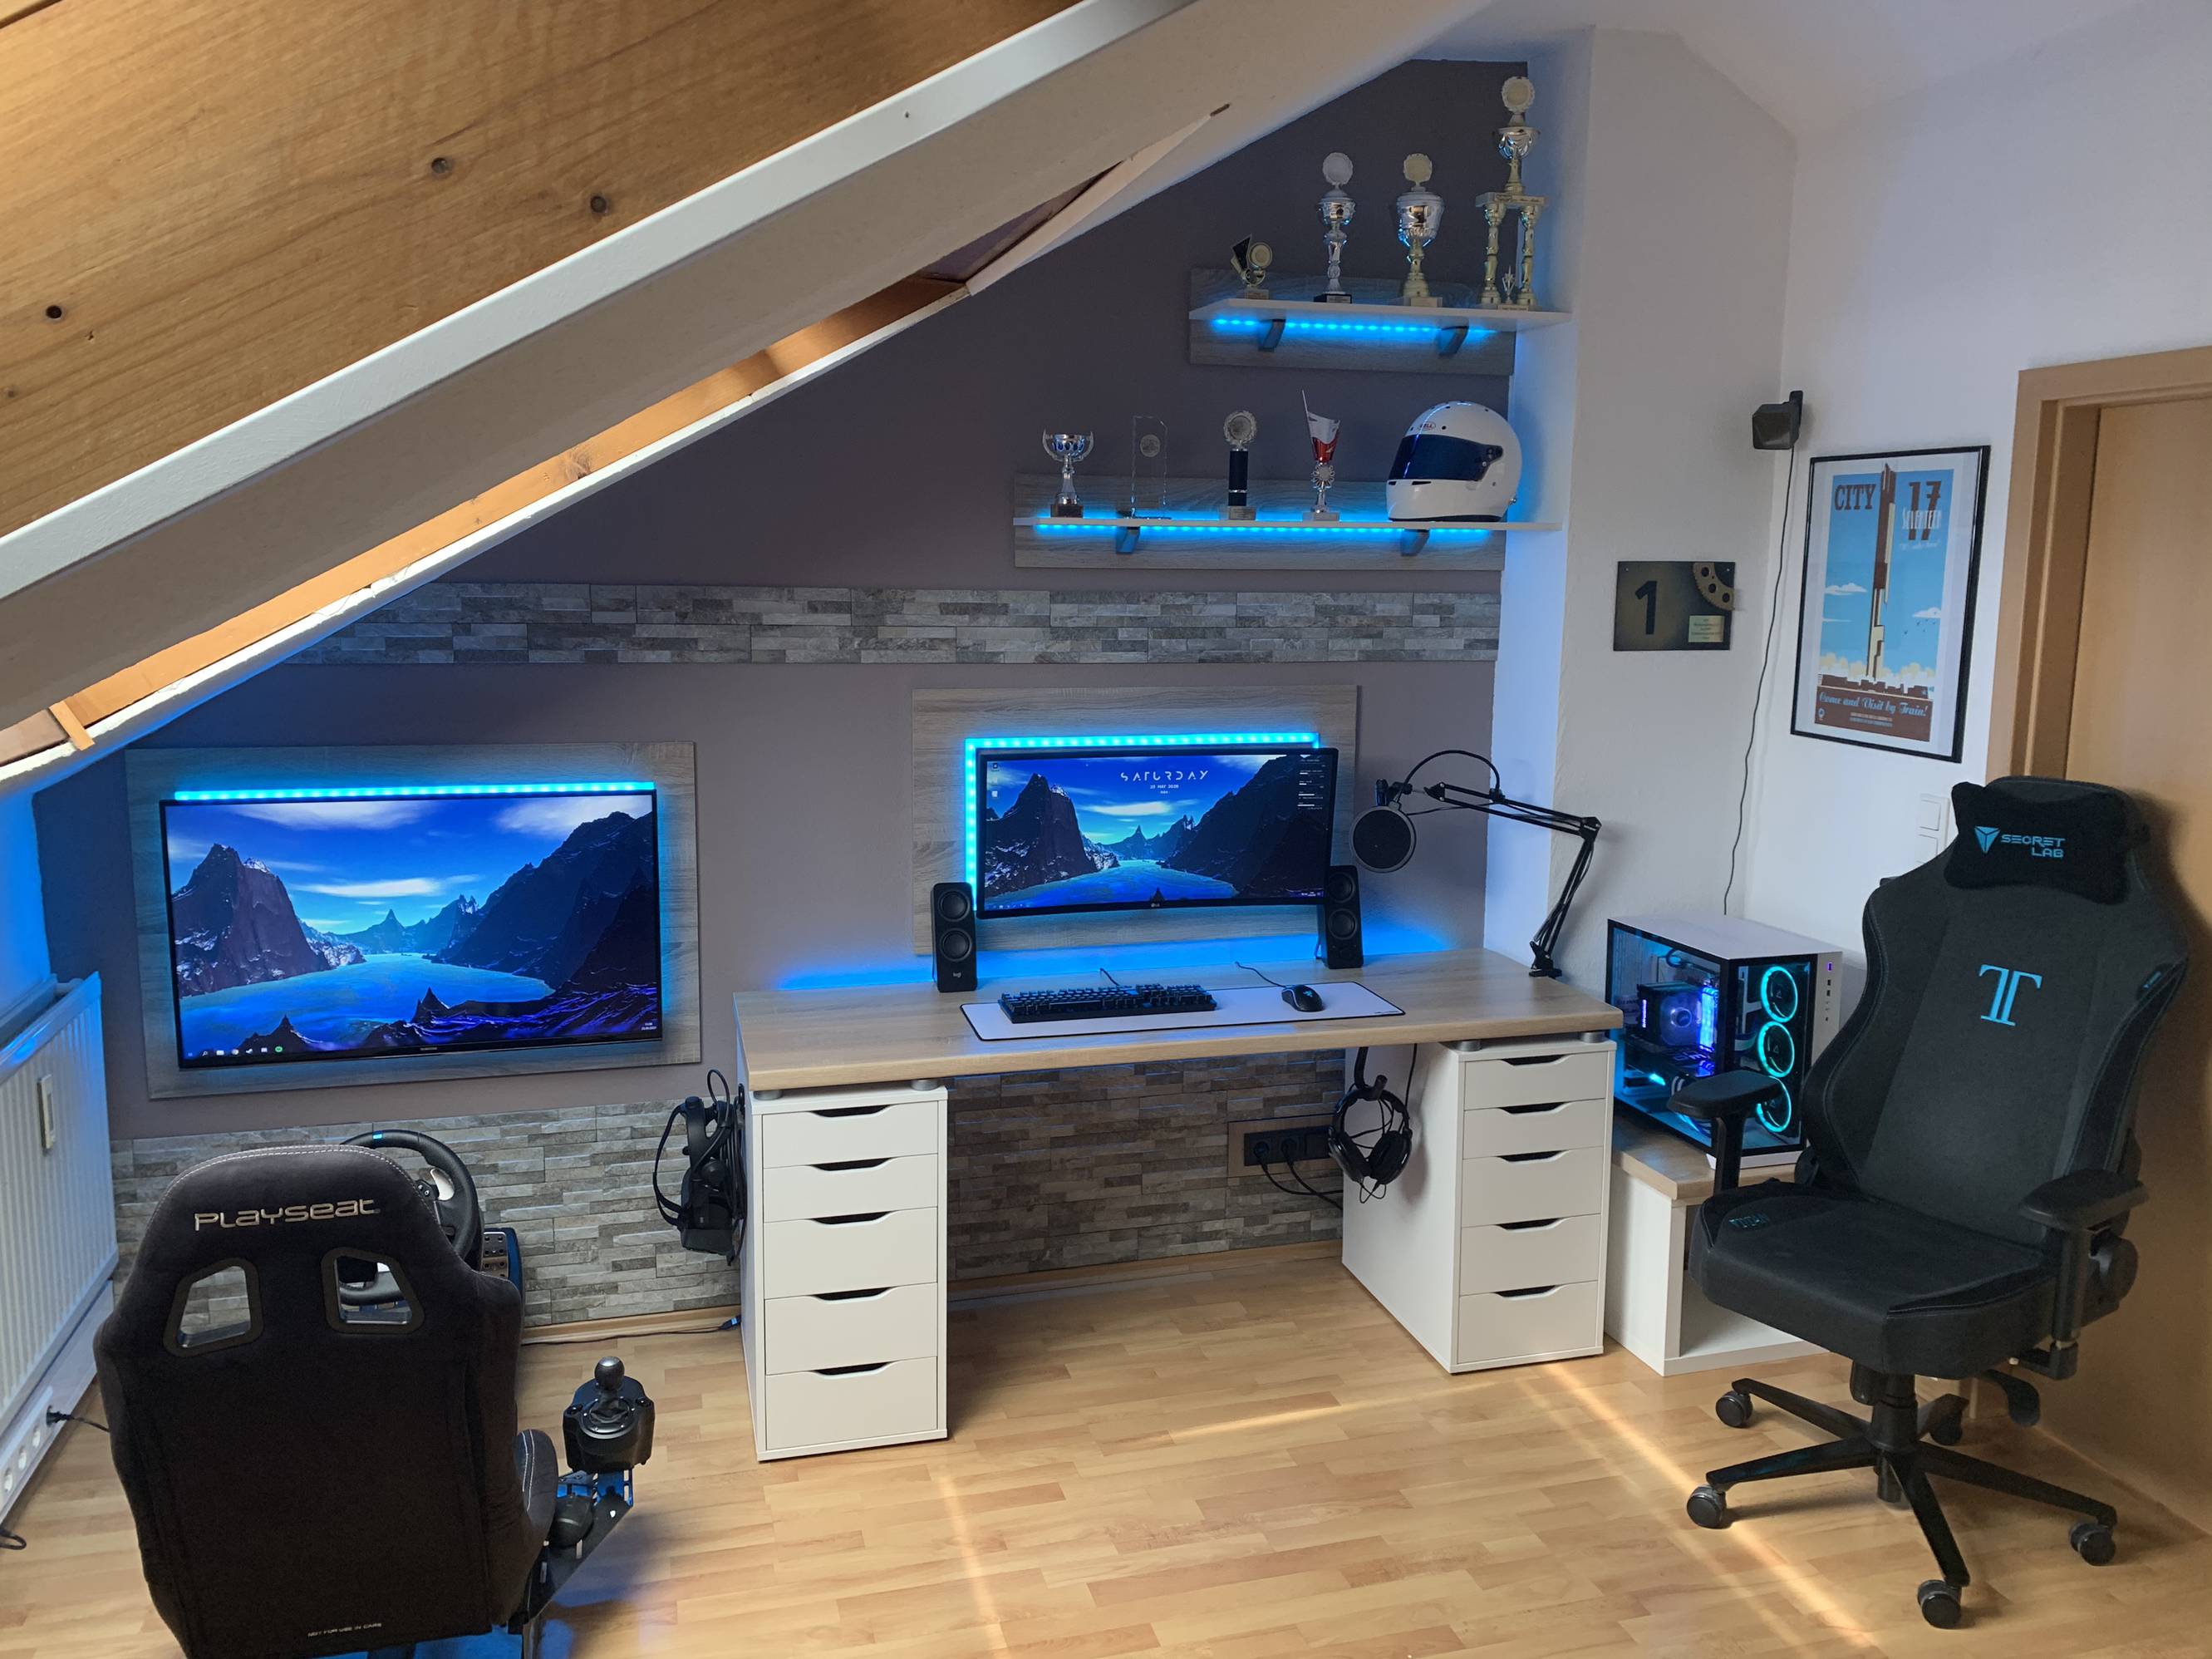 An LED-lit, racing themed gaming space tucked into a handsome attic or loft-style room.